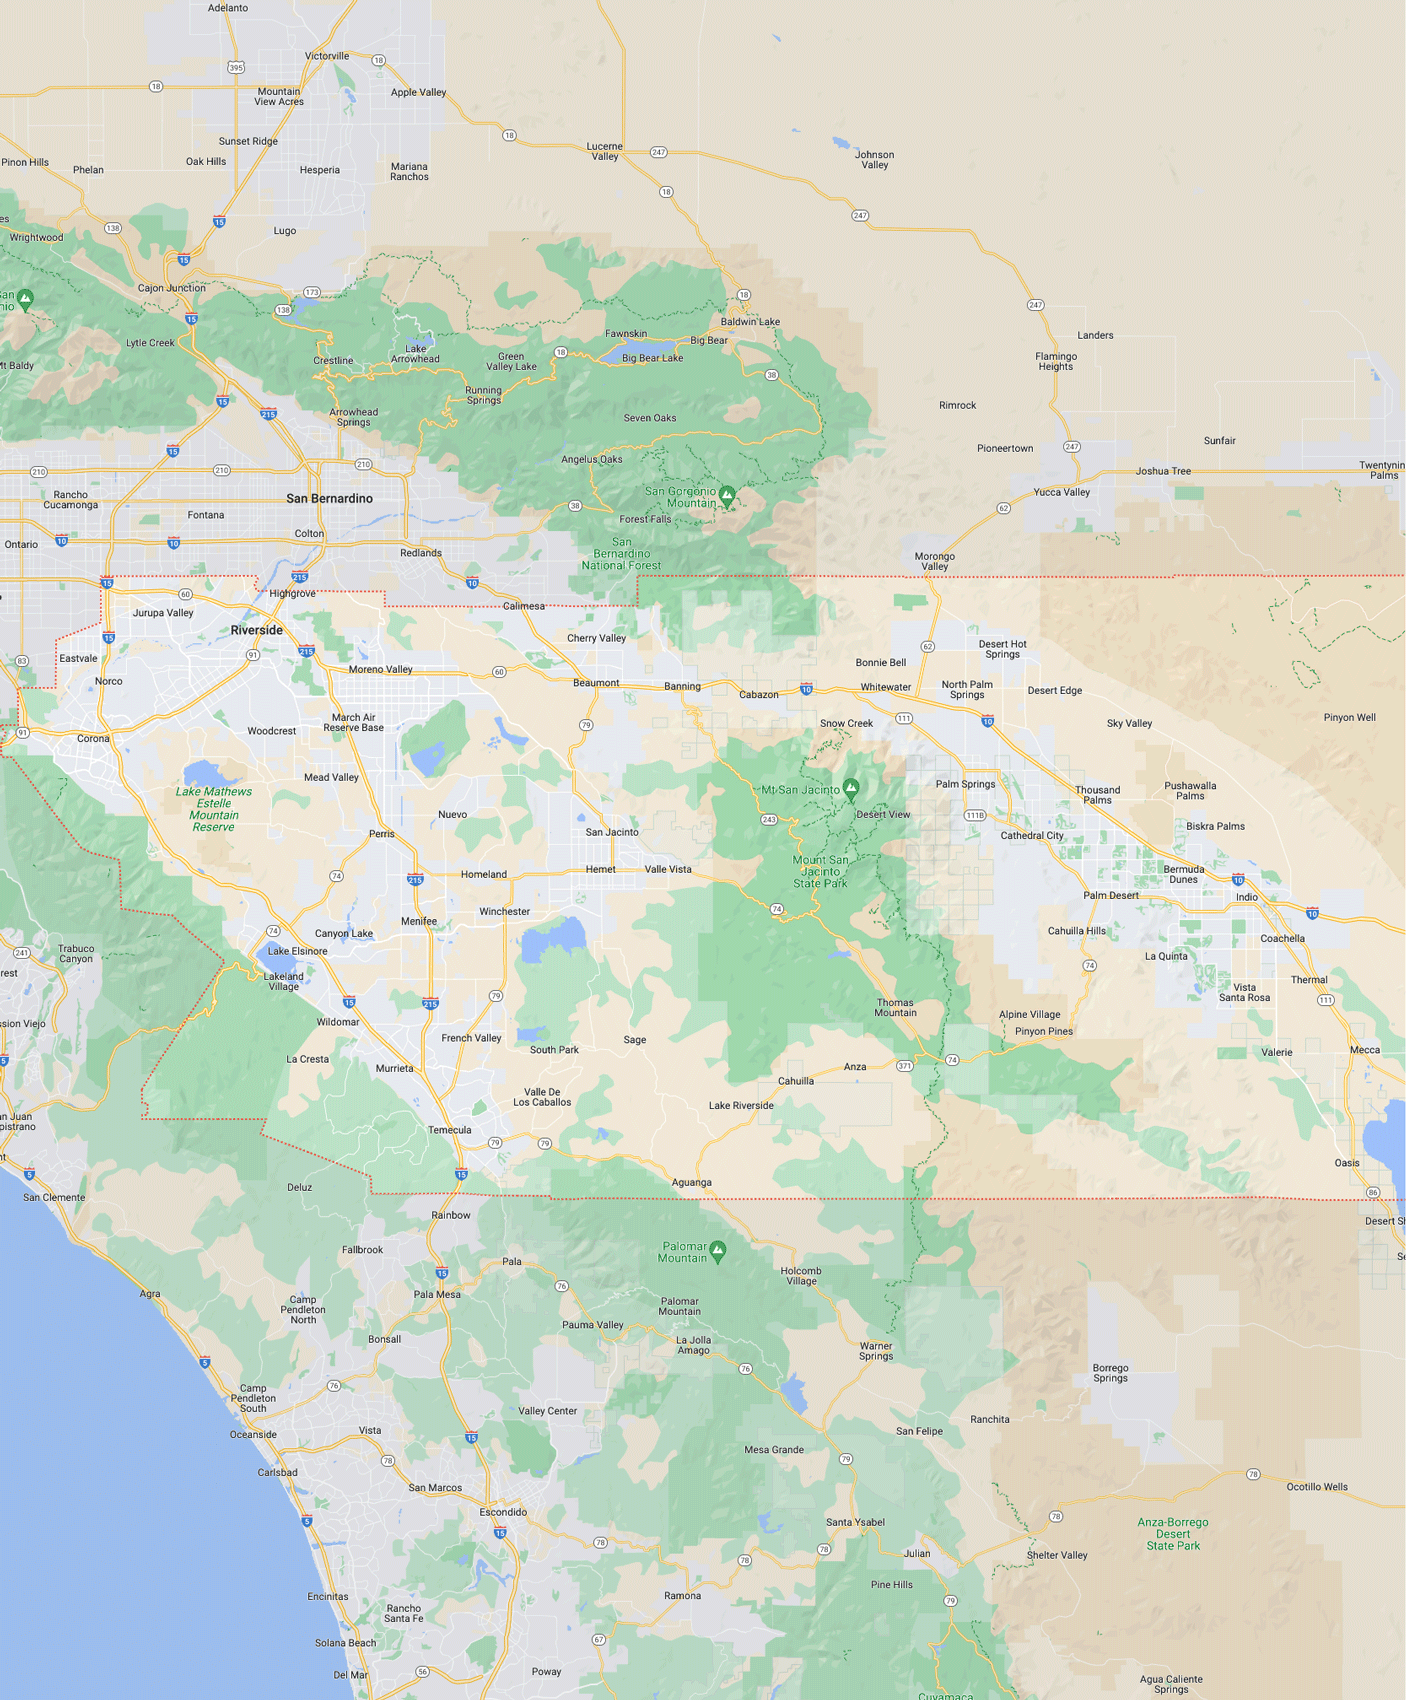 Porcelain and Fiberglass Maintenance Co coverage area for Riverside County